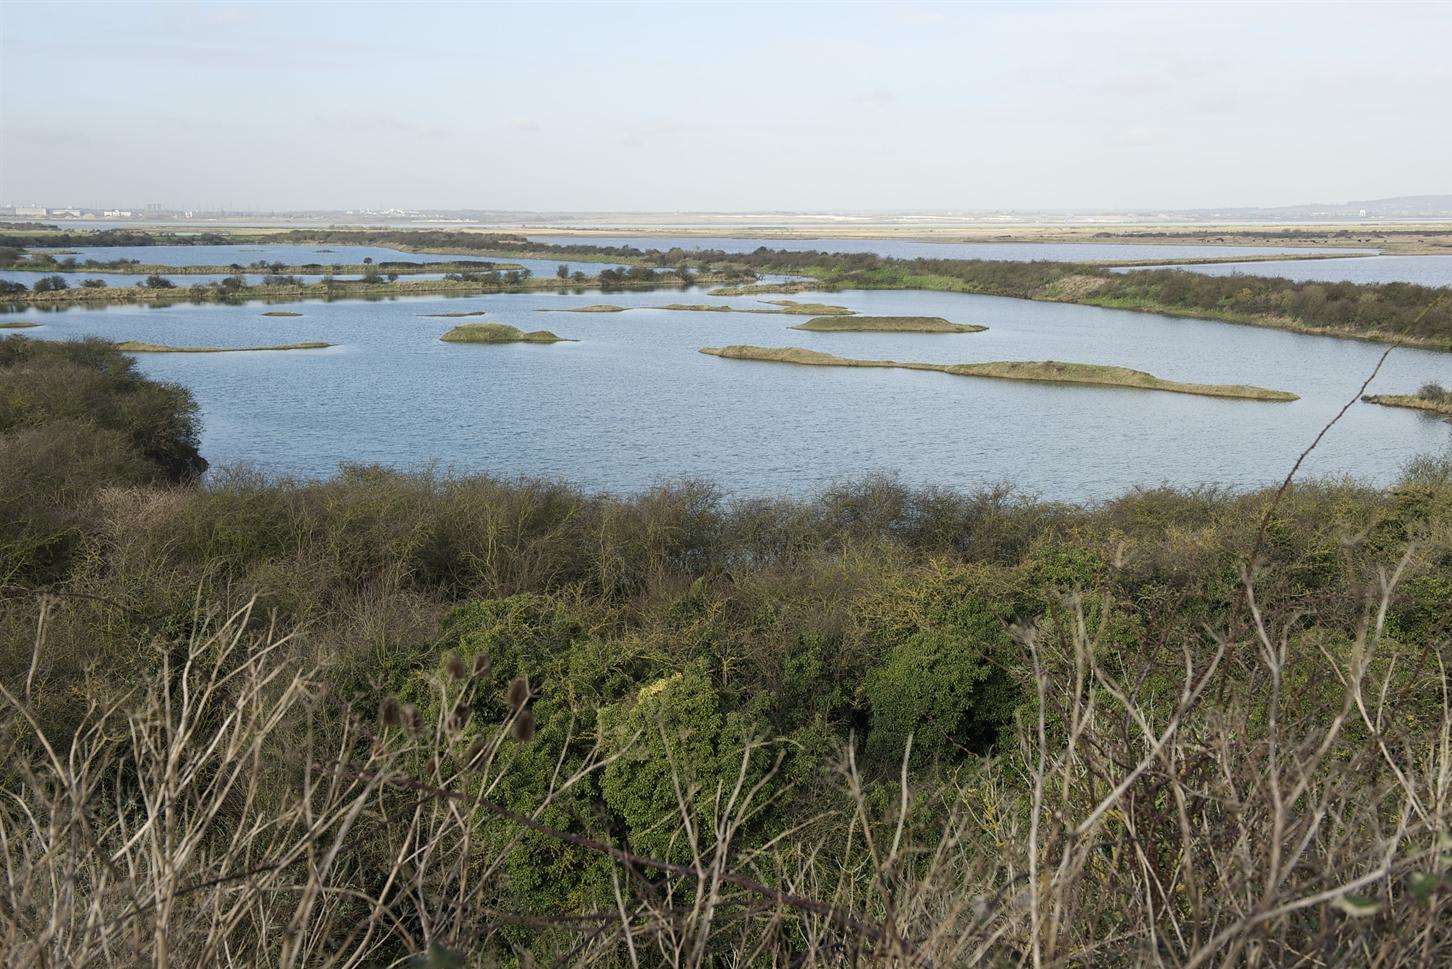 View from The Pinnacle over Cliffe Pools which is one of the sites that will be affected by the airport.